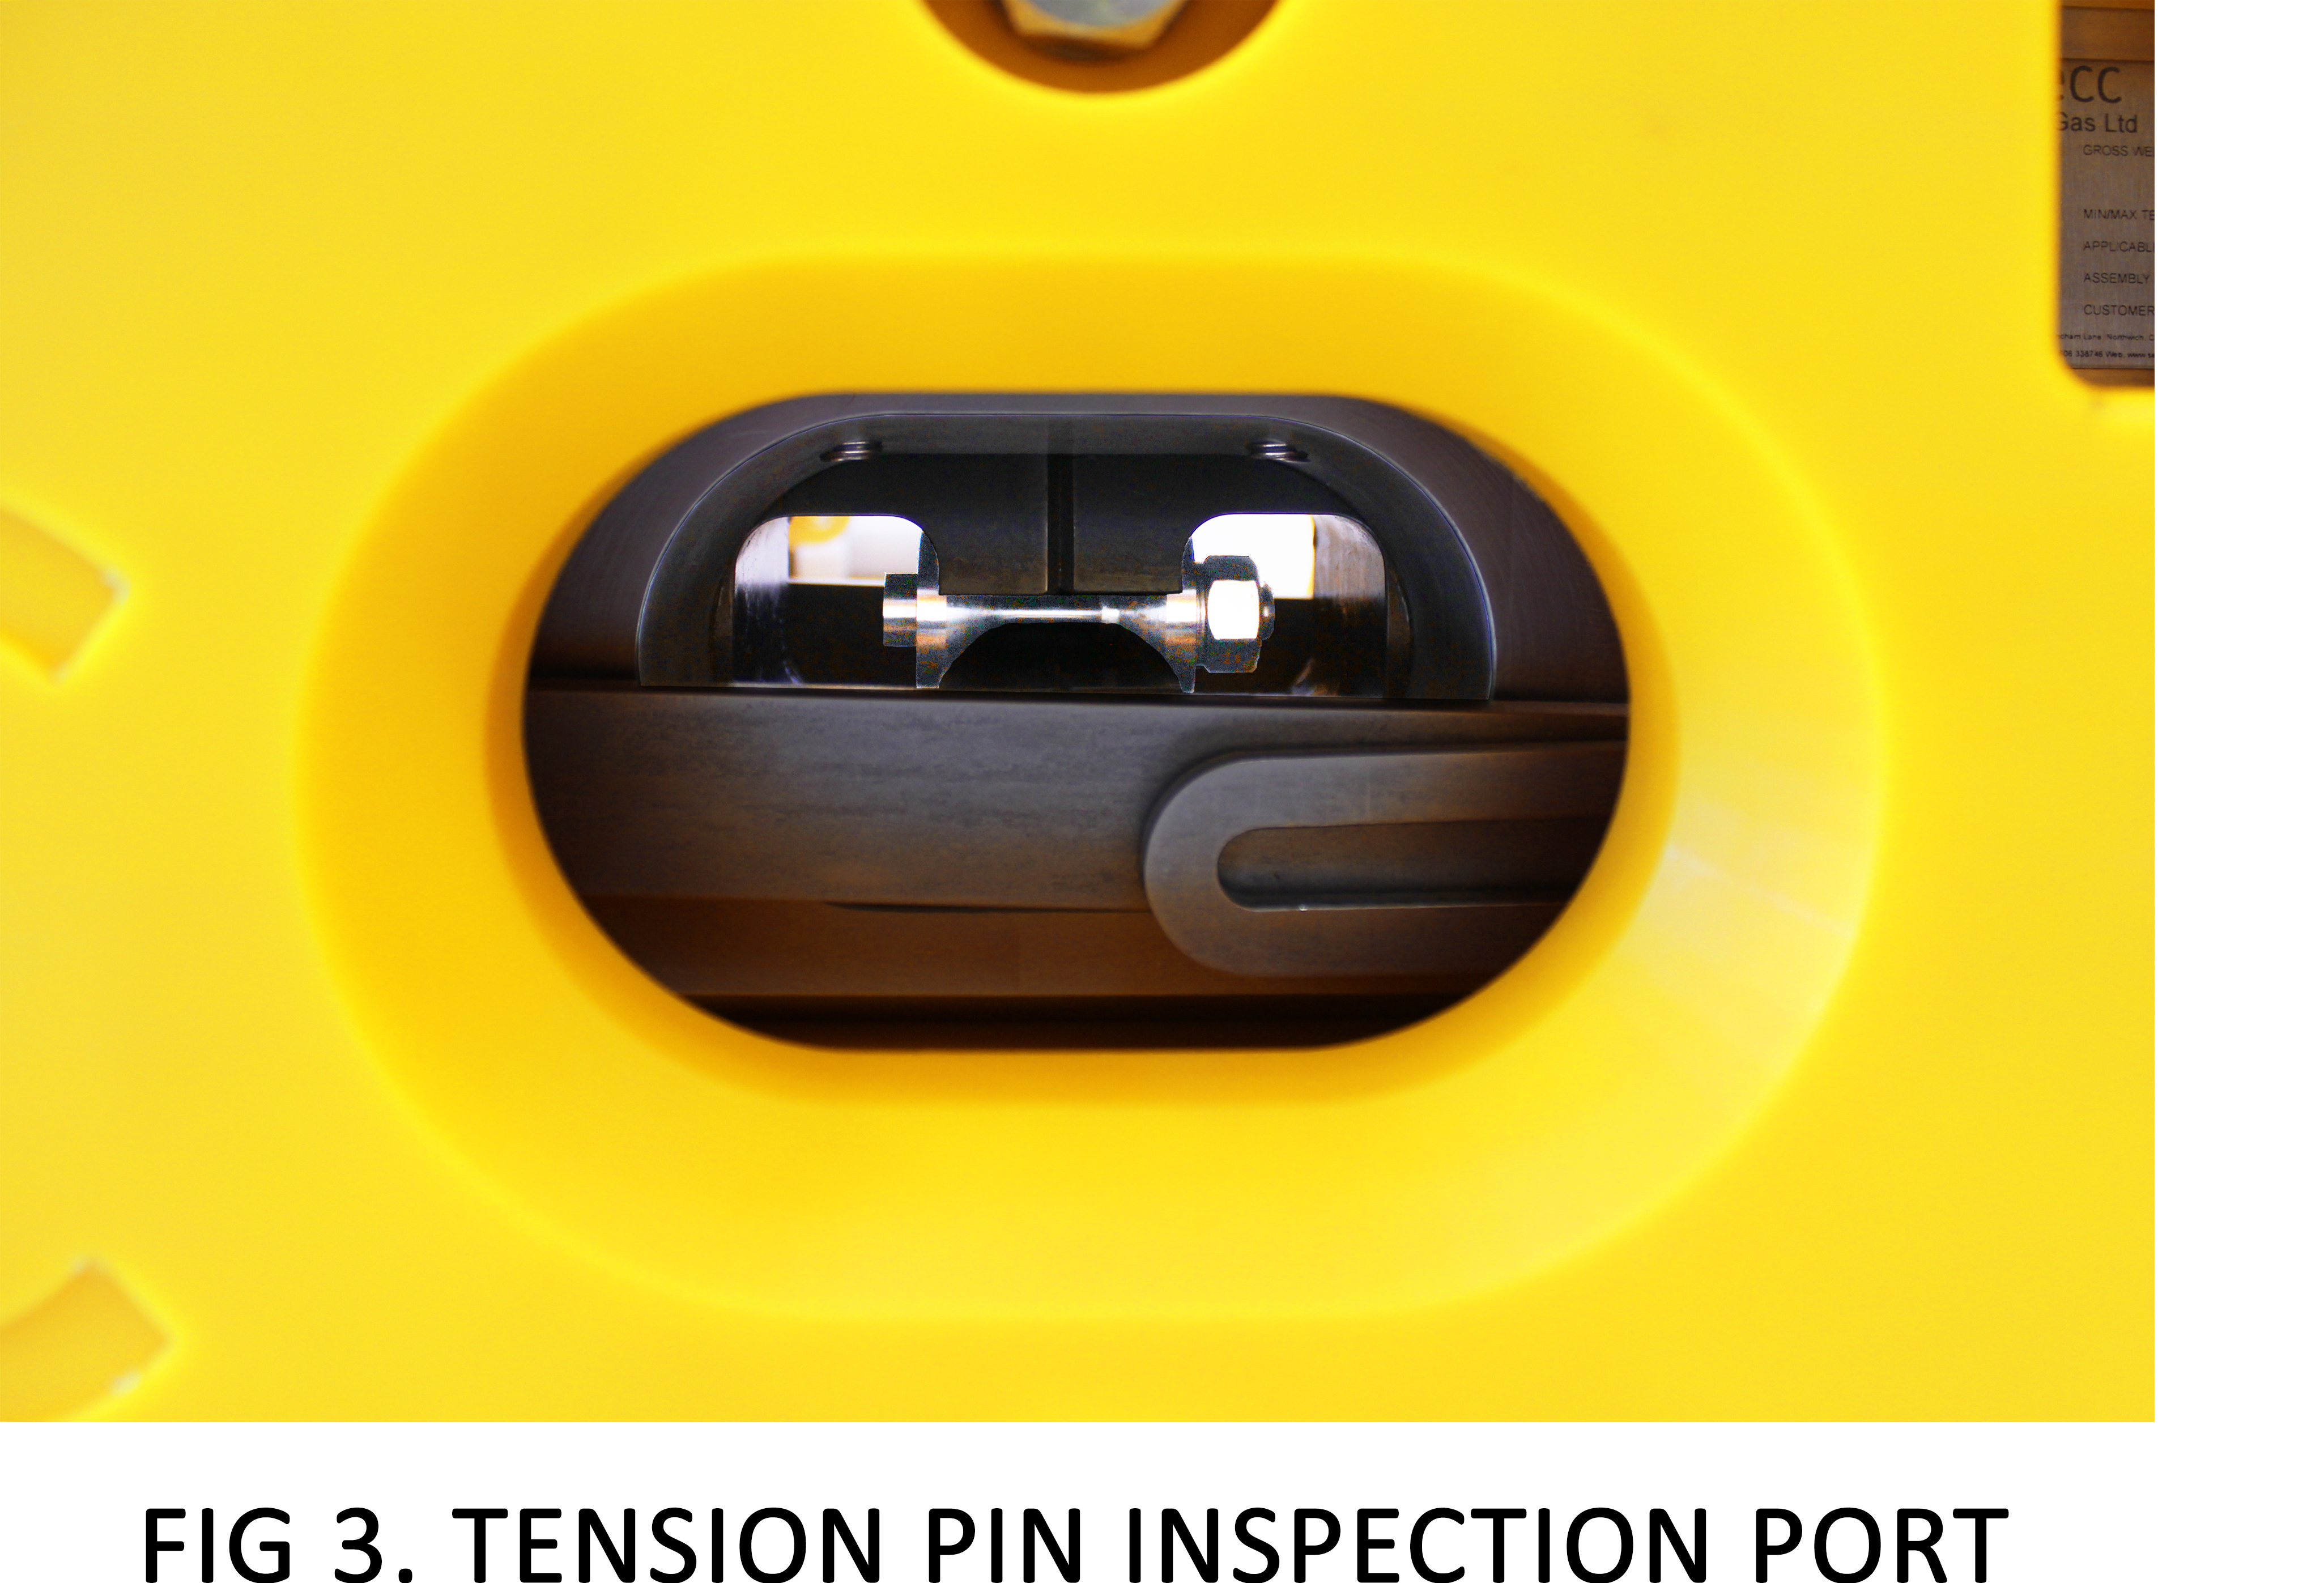 Tension pin inspection port website